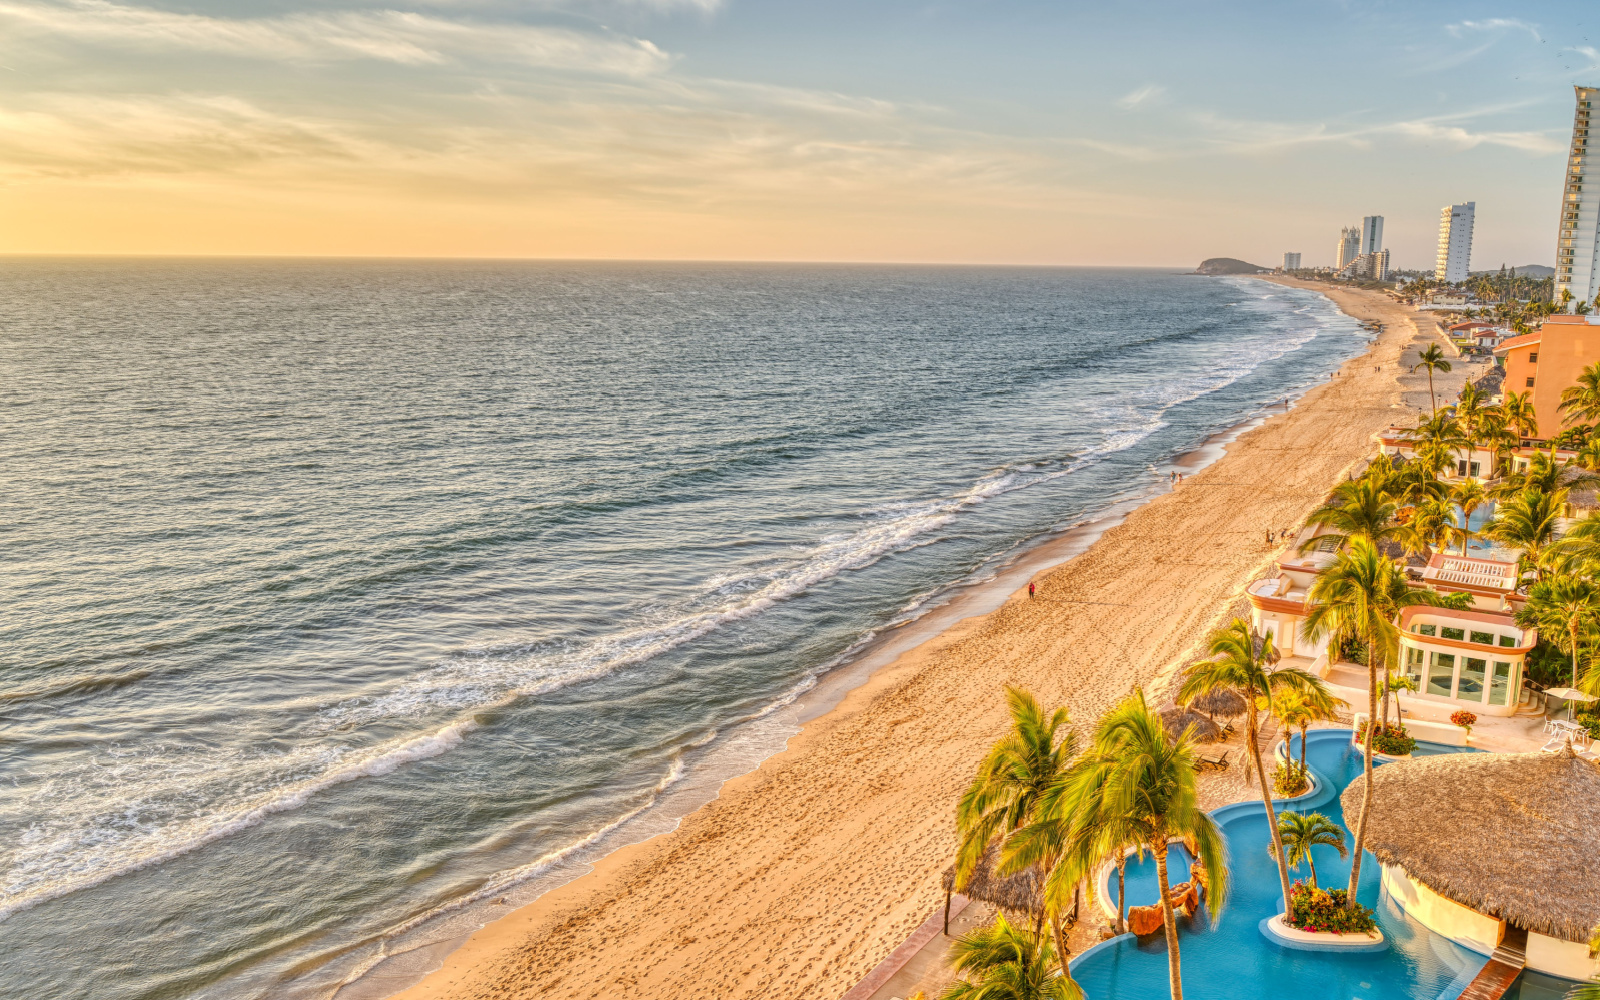 The Best & Worst Times to Visit Mazatlán (Our Take)